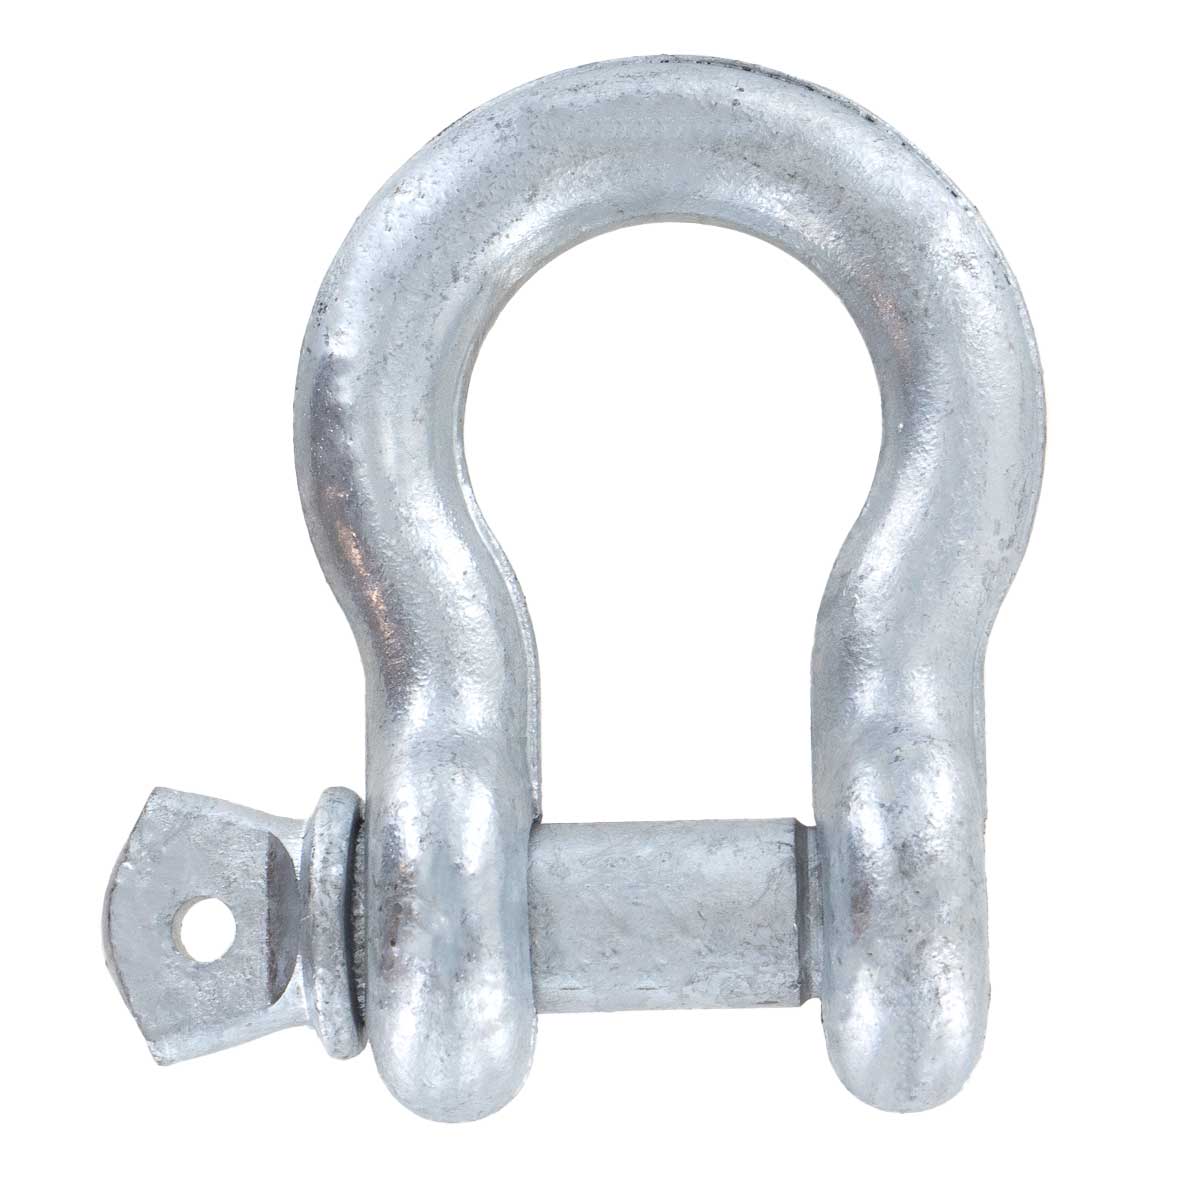 7/8" Galvanized Screw Pin Anchor Shackle - 6.5 Ton rear view